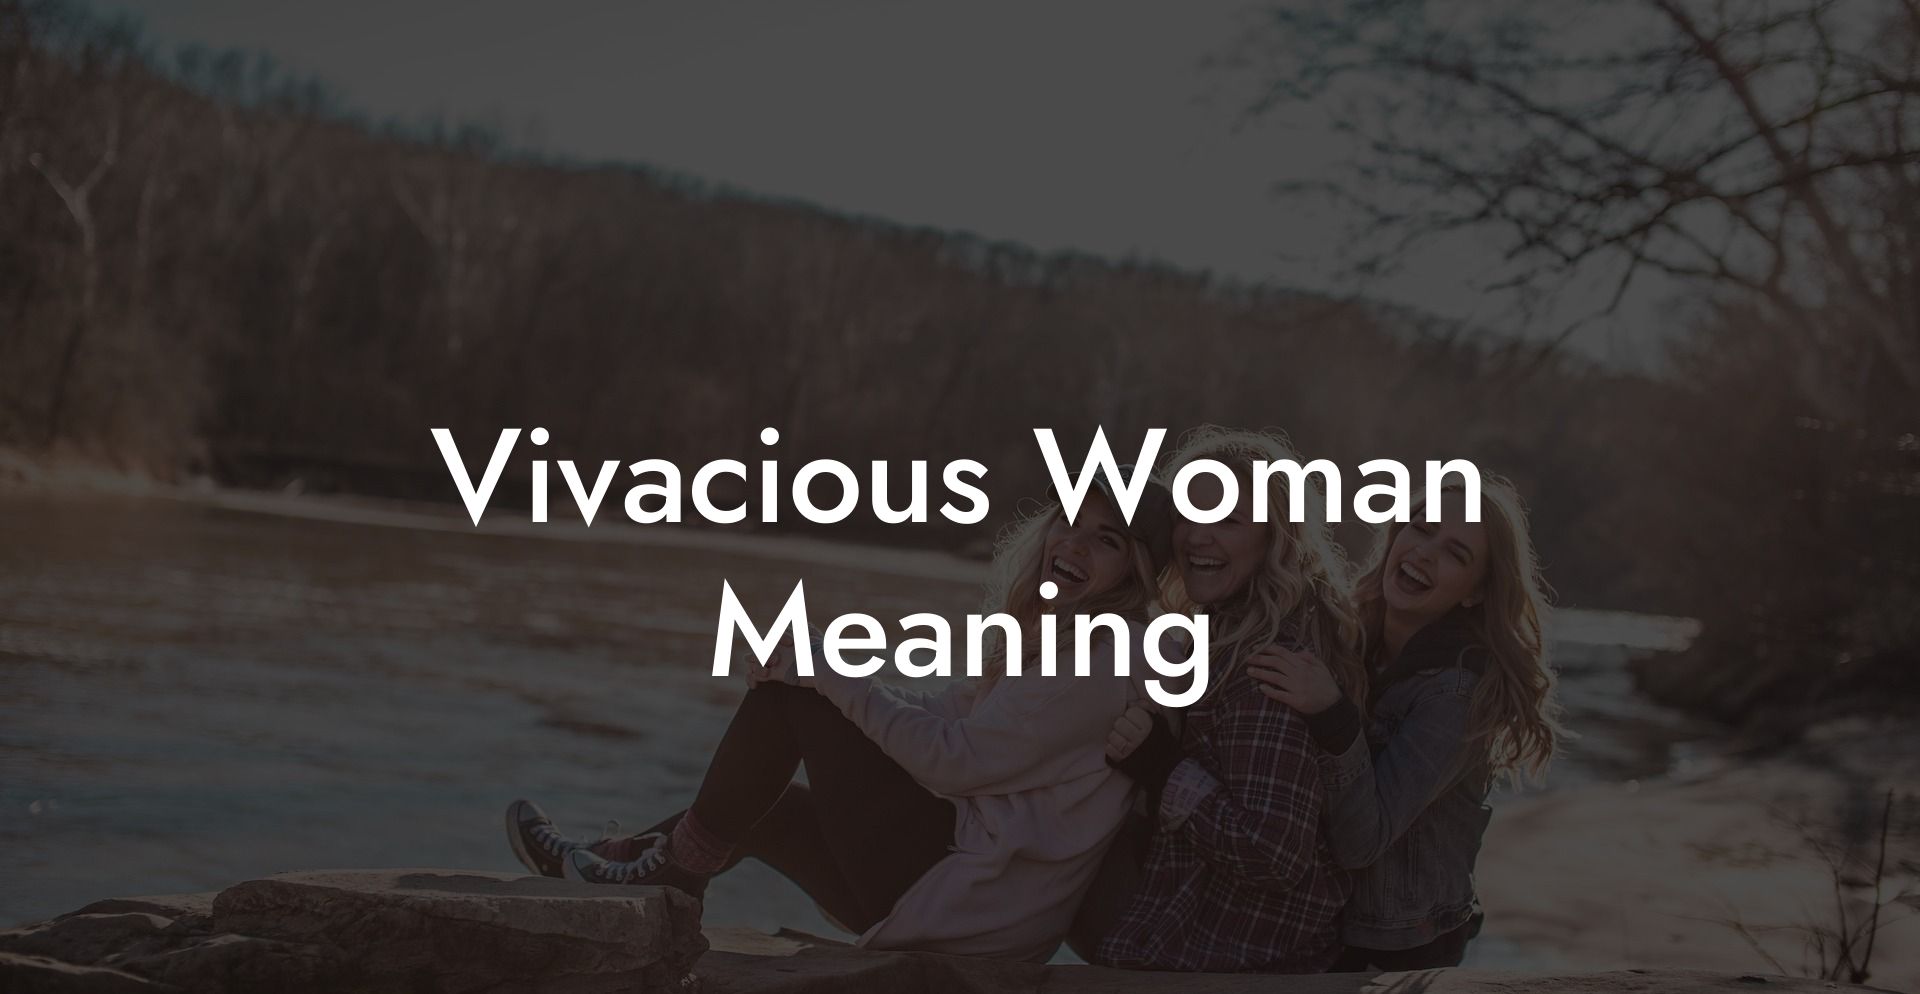 Vivacious Woman Meaning